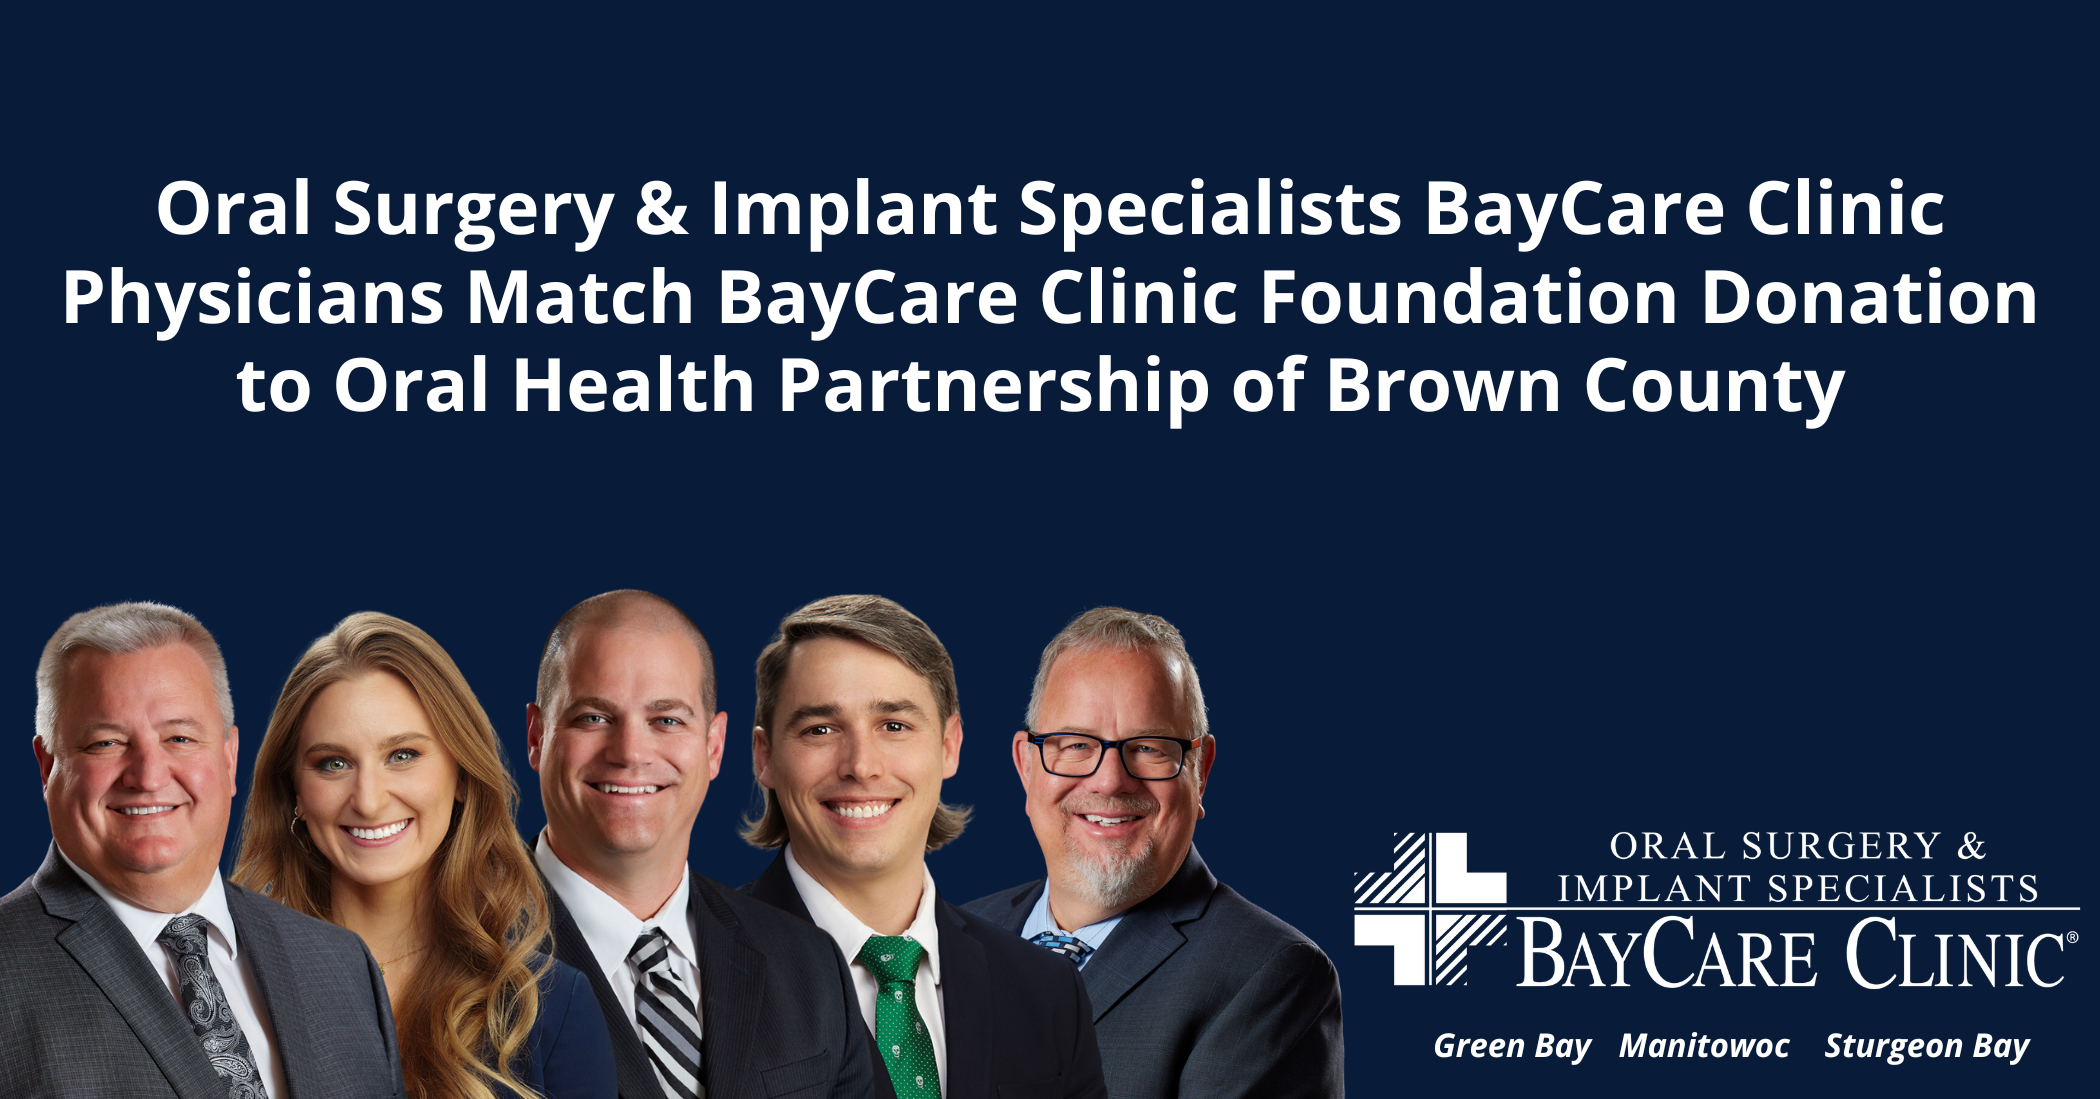 Oral Surgery & Implant Specialists BayCare Clinic Physicians Match BayCare Clinic Foundation’s Generous Donation to Oral Health Partnership